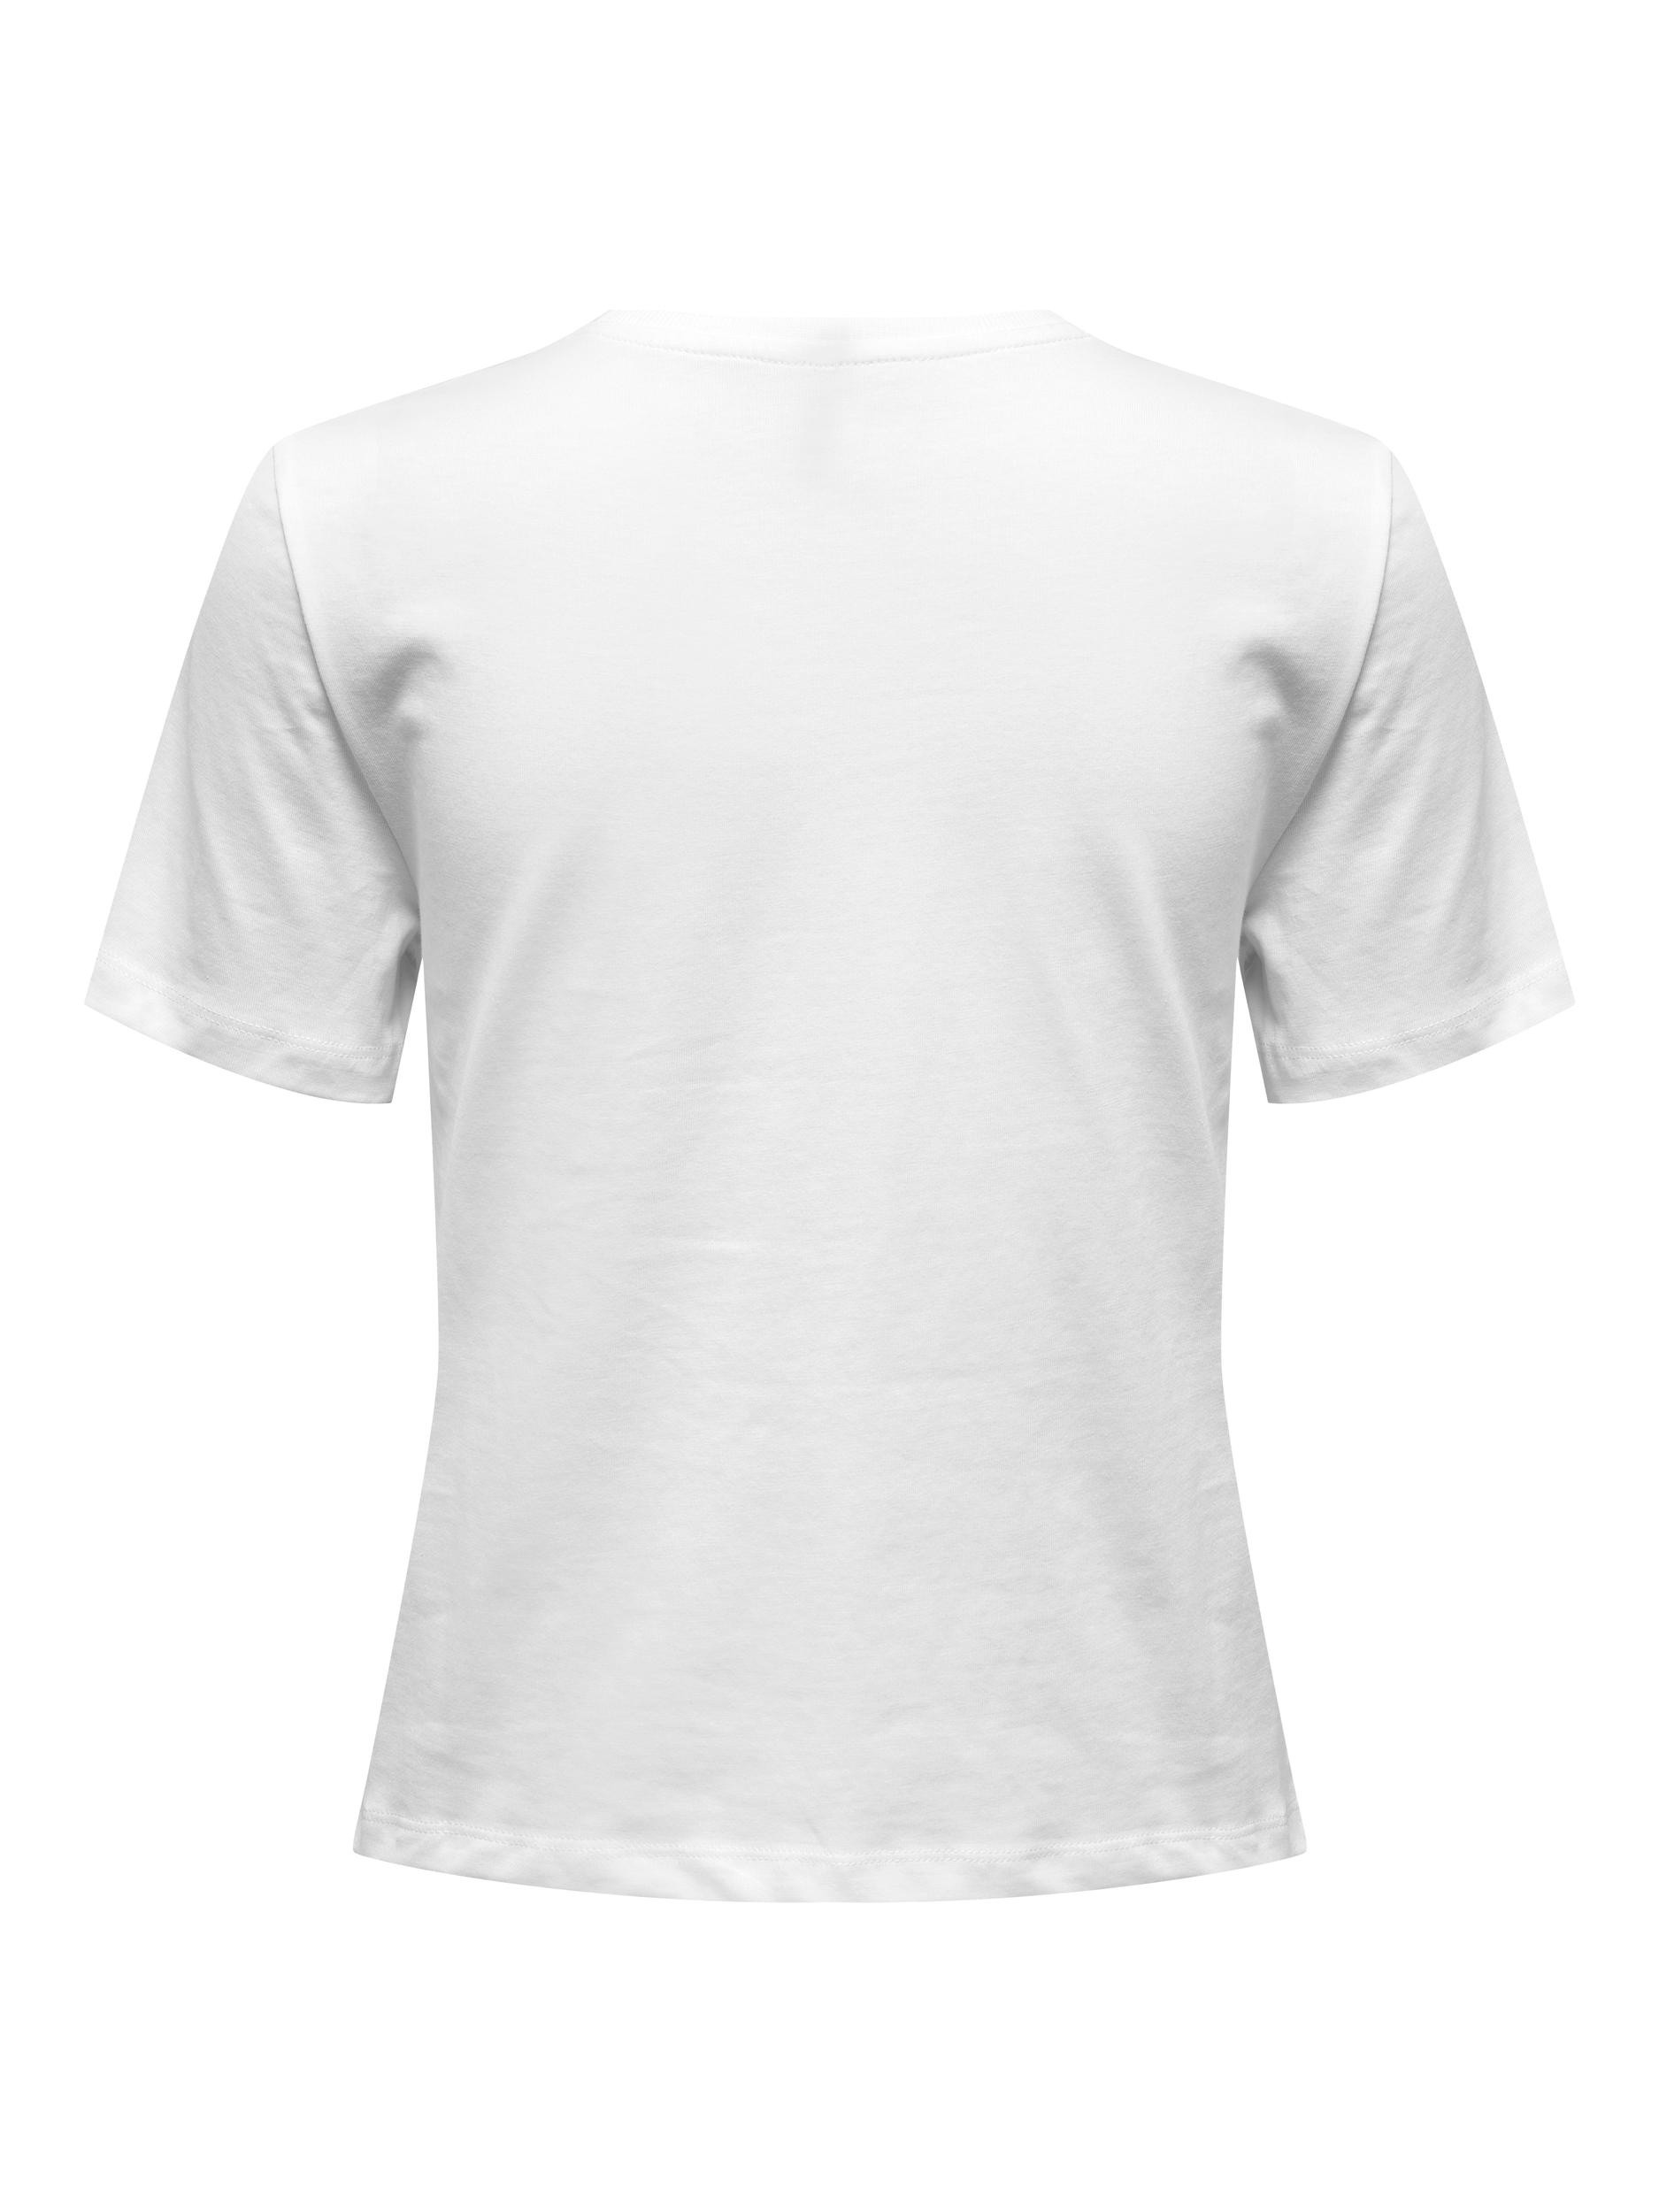 Only -Cotton T-shirt with rhinestones, White, large image number 1